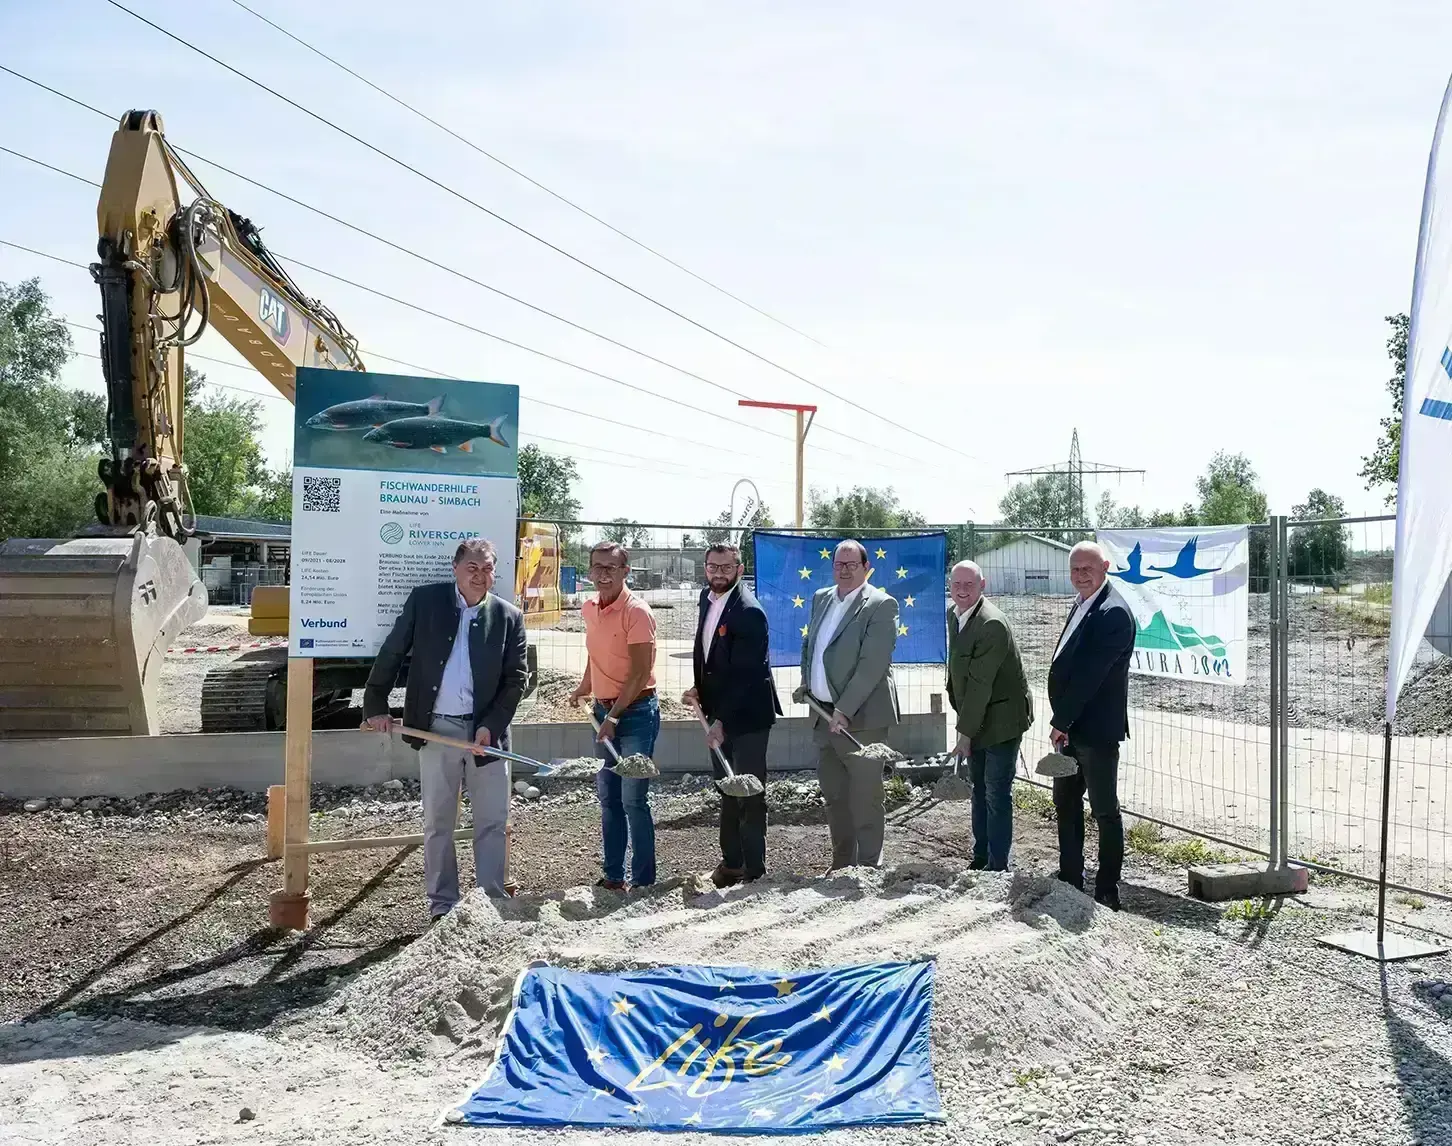 Group of individuals at a groundbreaking ceremony at a construction site with an excavator and informational signs in the background.